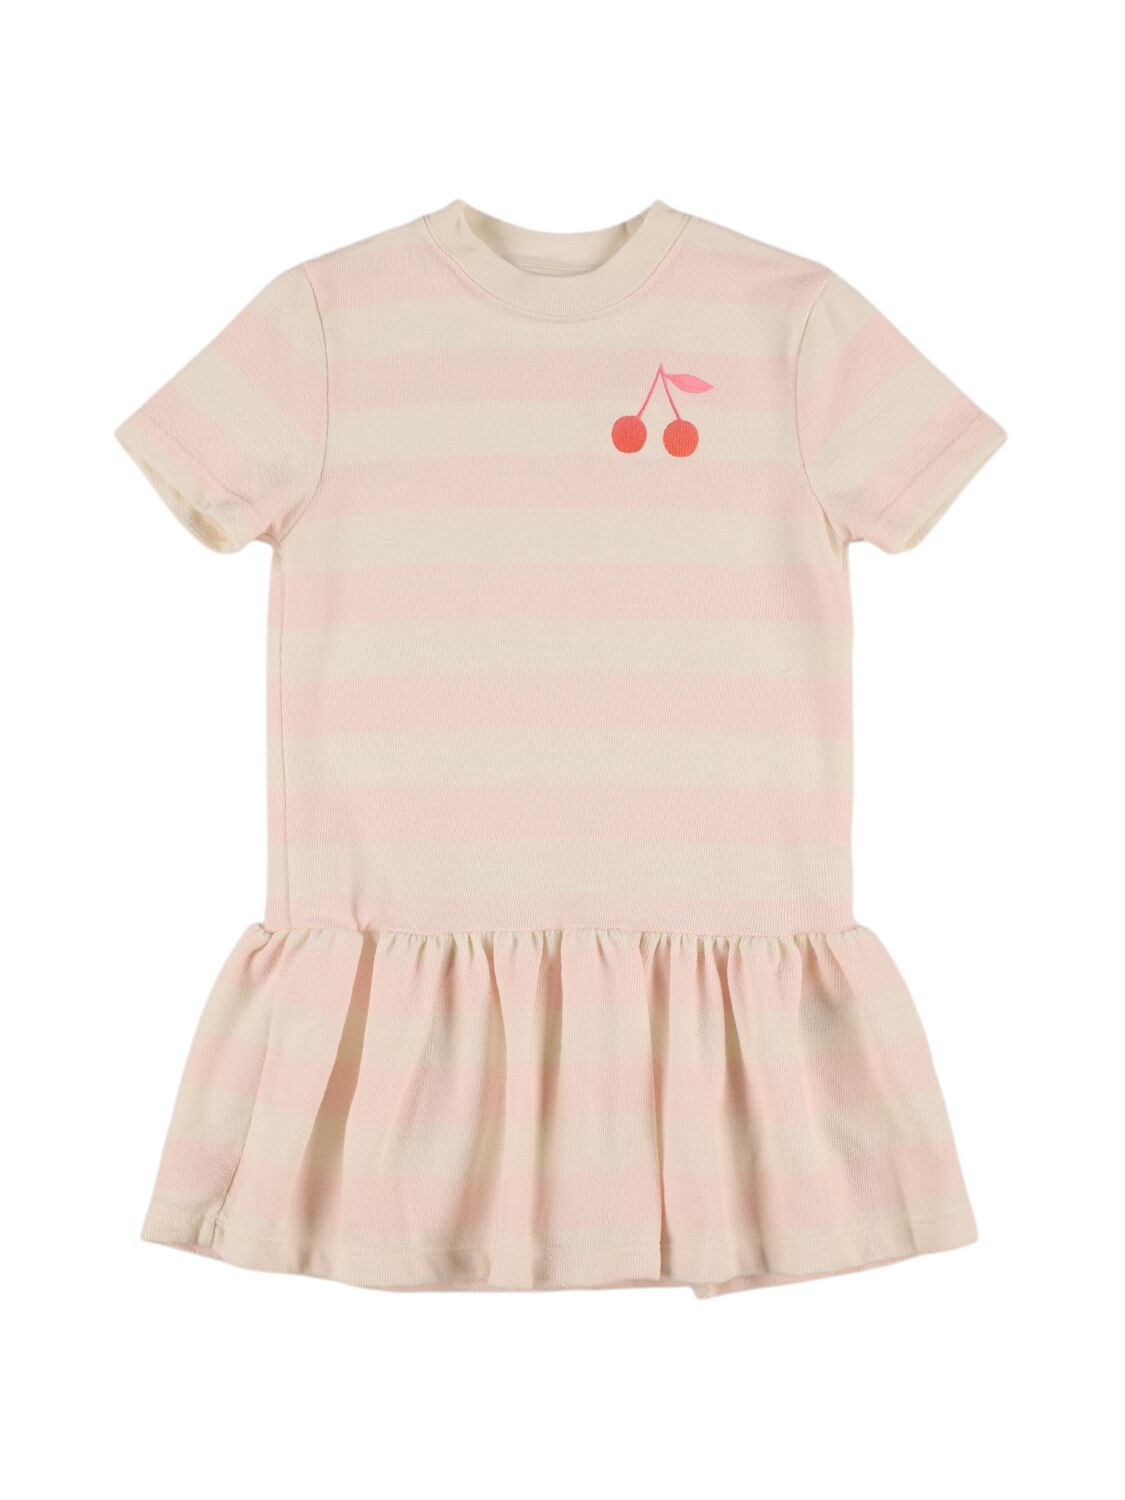 Bonpoint Kids' Embroidered Cotton Jersey Dress In Pink